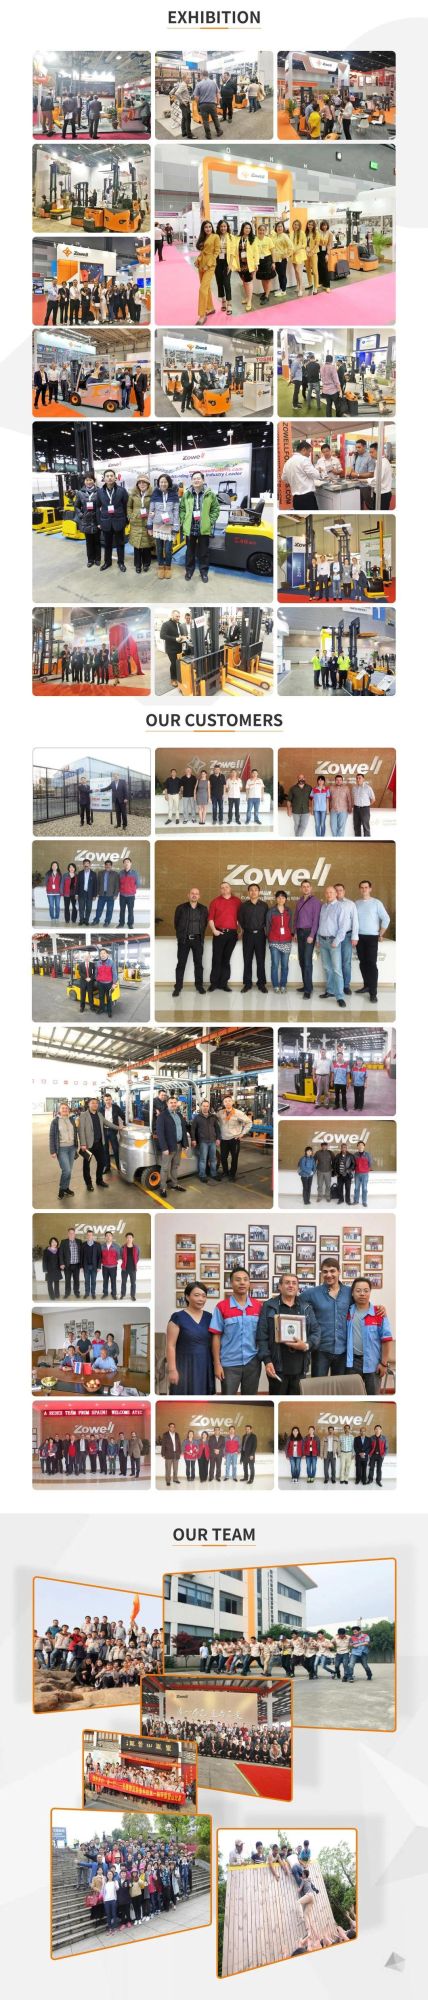 High Performance Self-Propelled Zowell Scissor Table Aerial Work Extension Platform Lift with ISO 9001